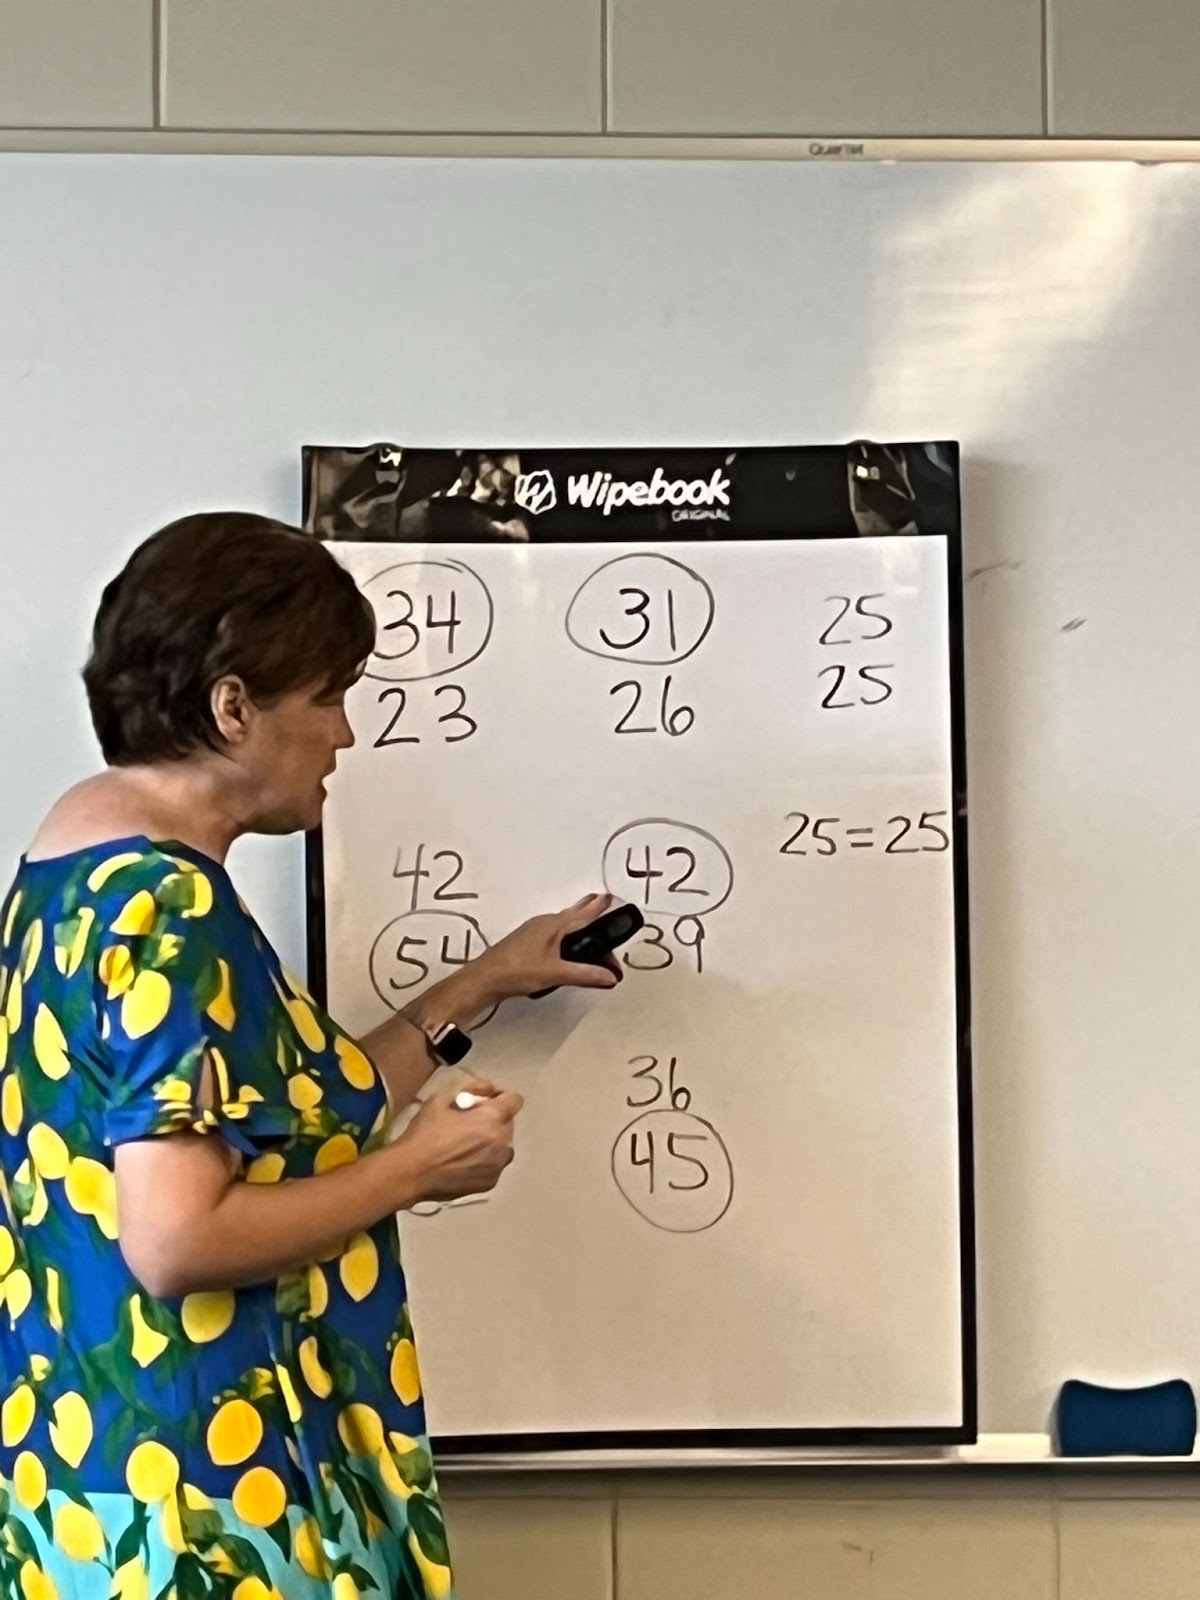 Wipebook is hung on a wall and used to complete mathematical thinking tasks with a black dry erase marker.